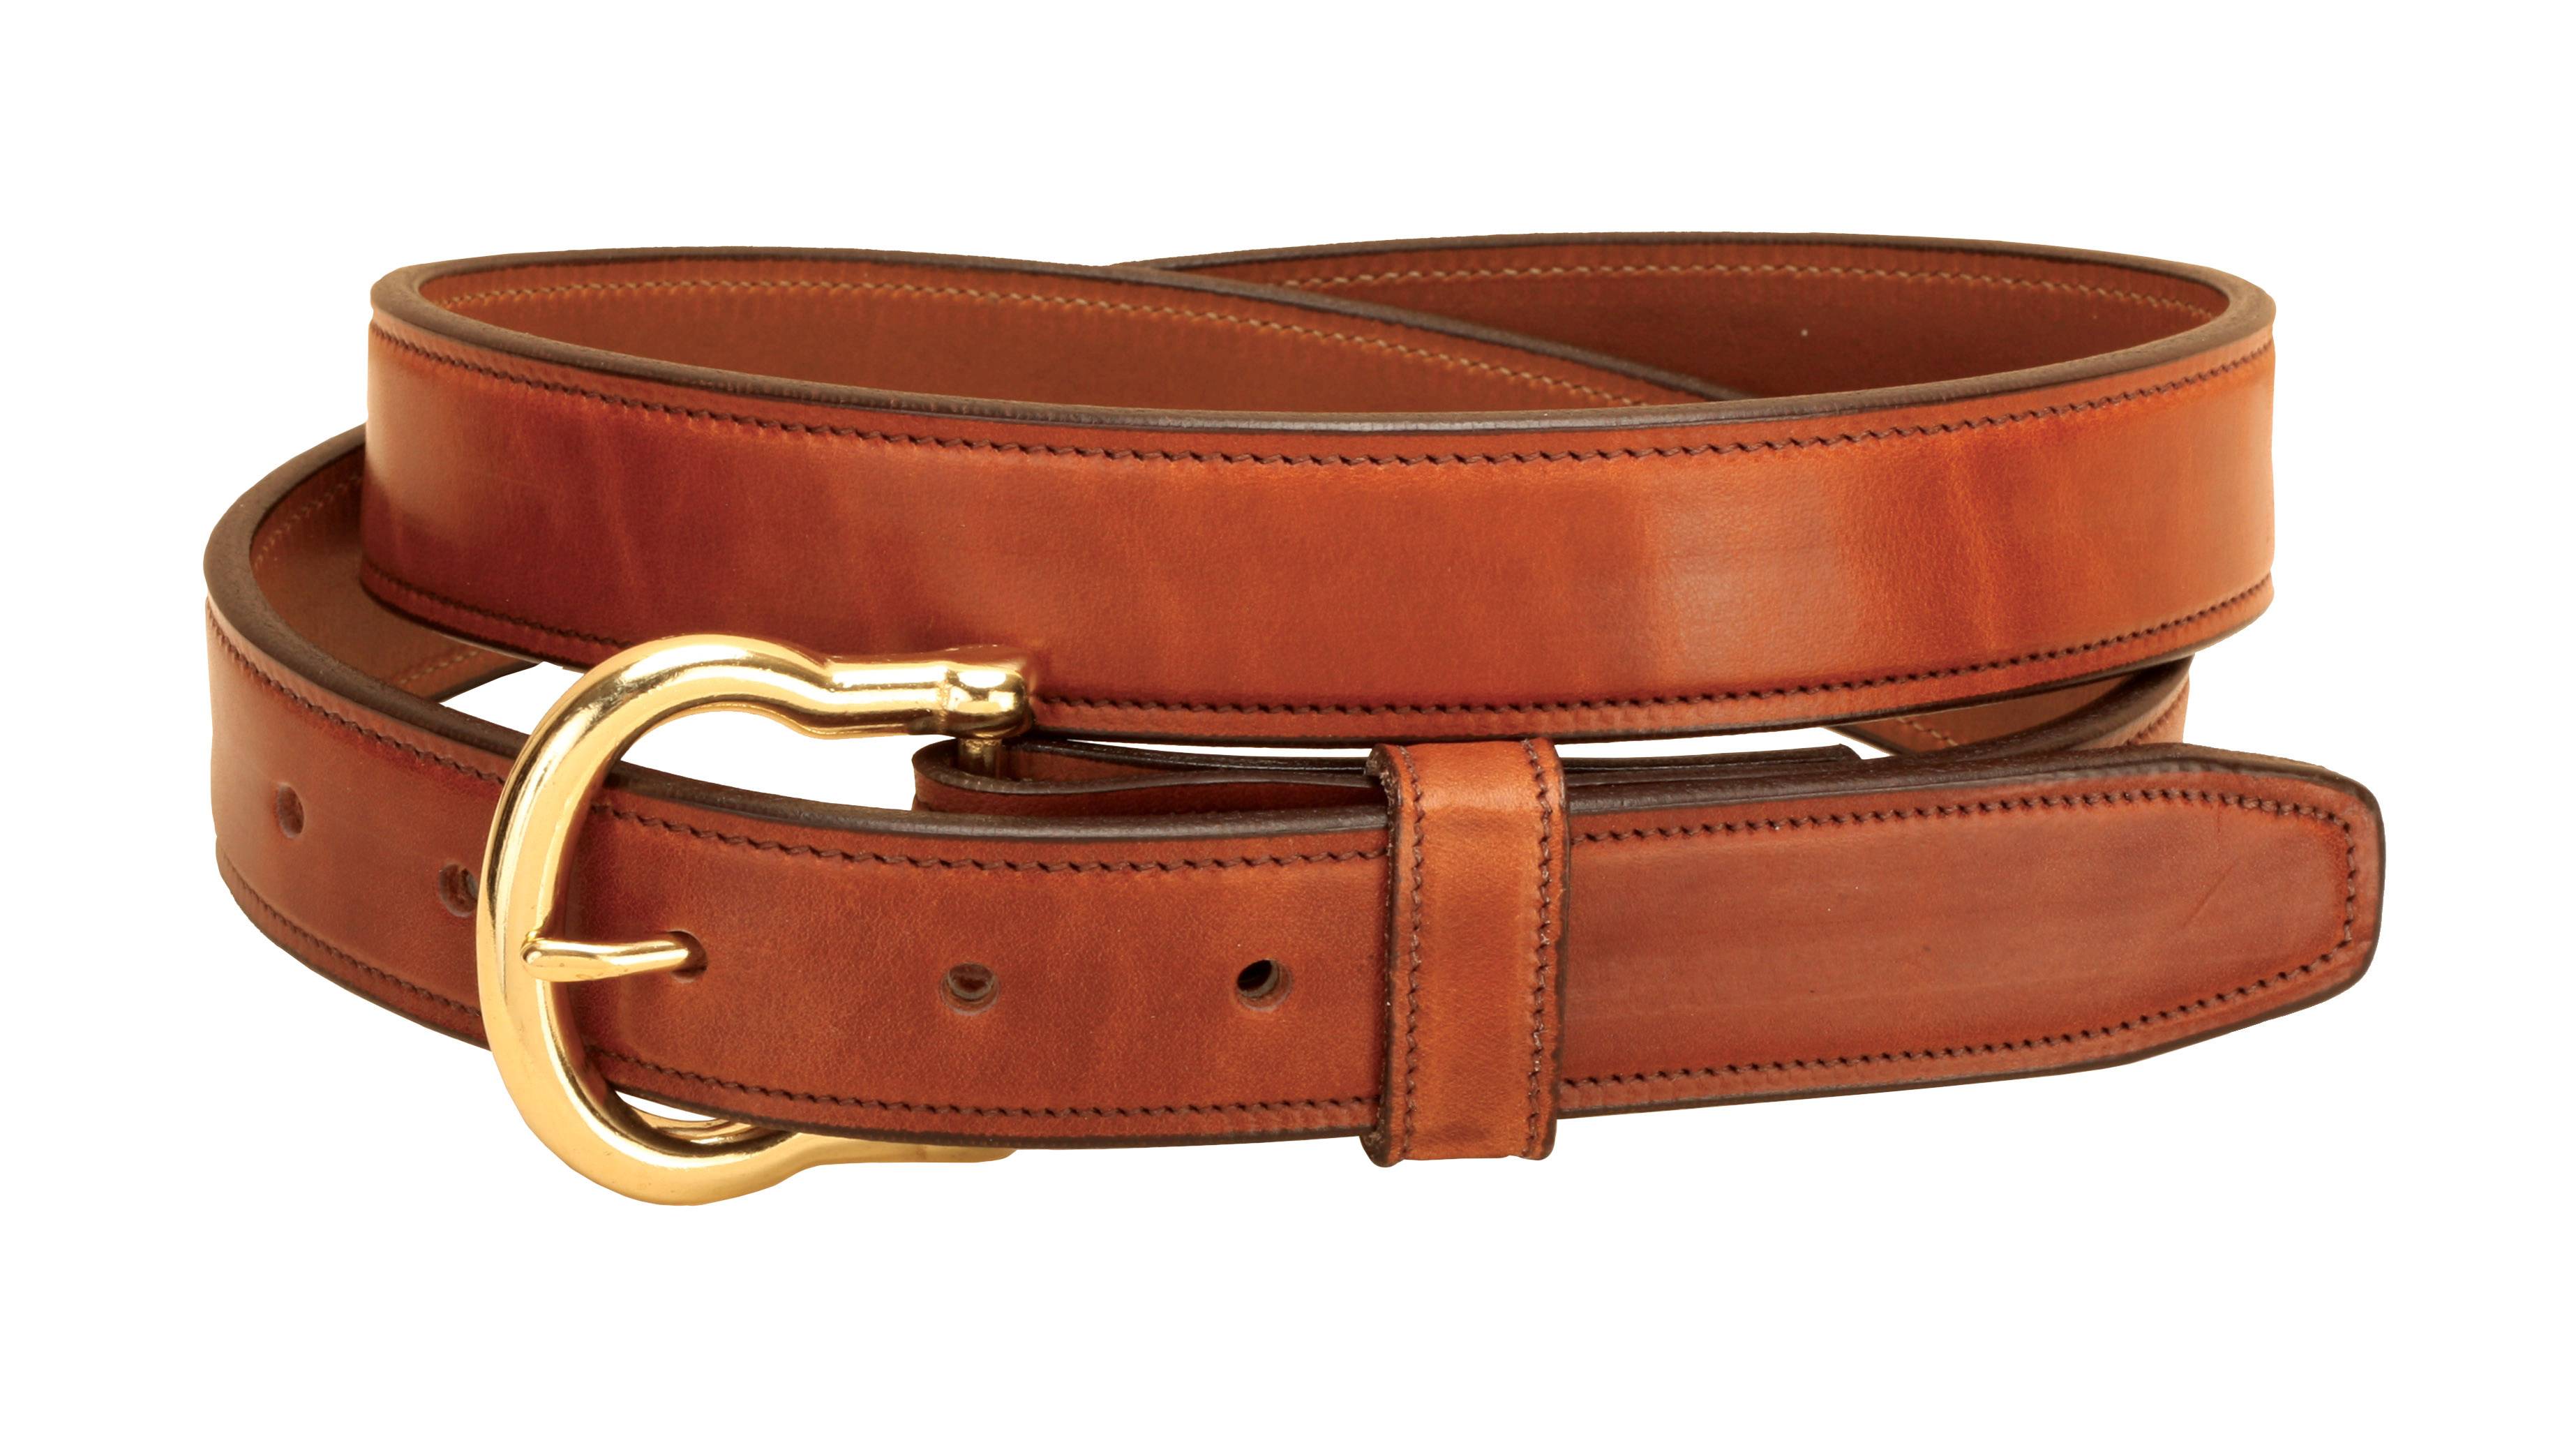 Tory Leather Fully Stitched Harness Leather Belt